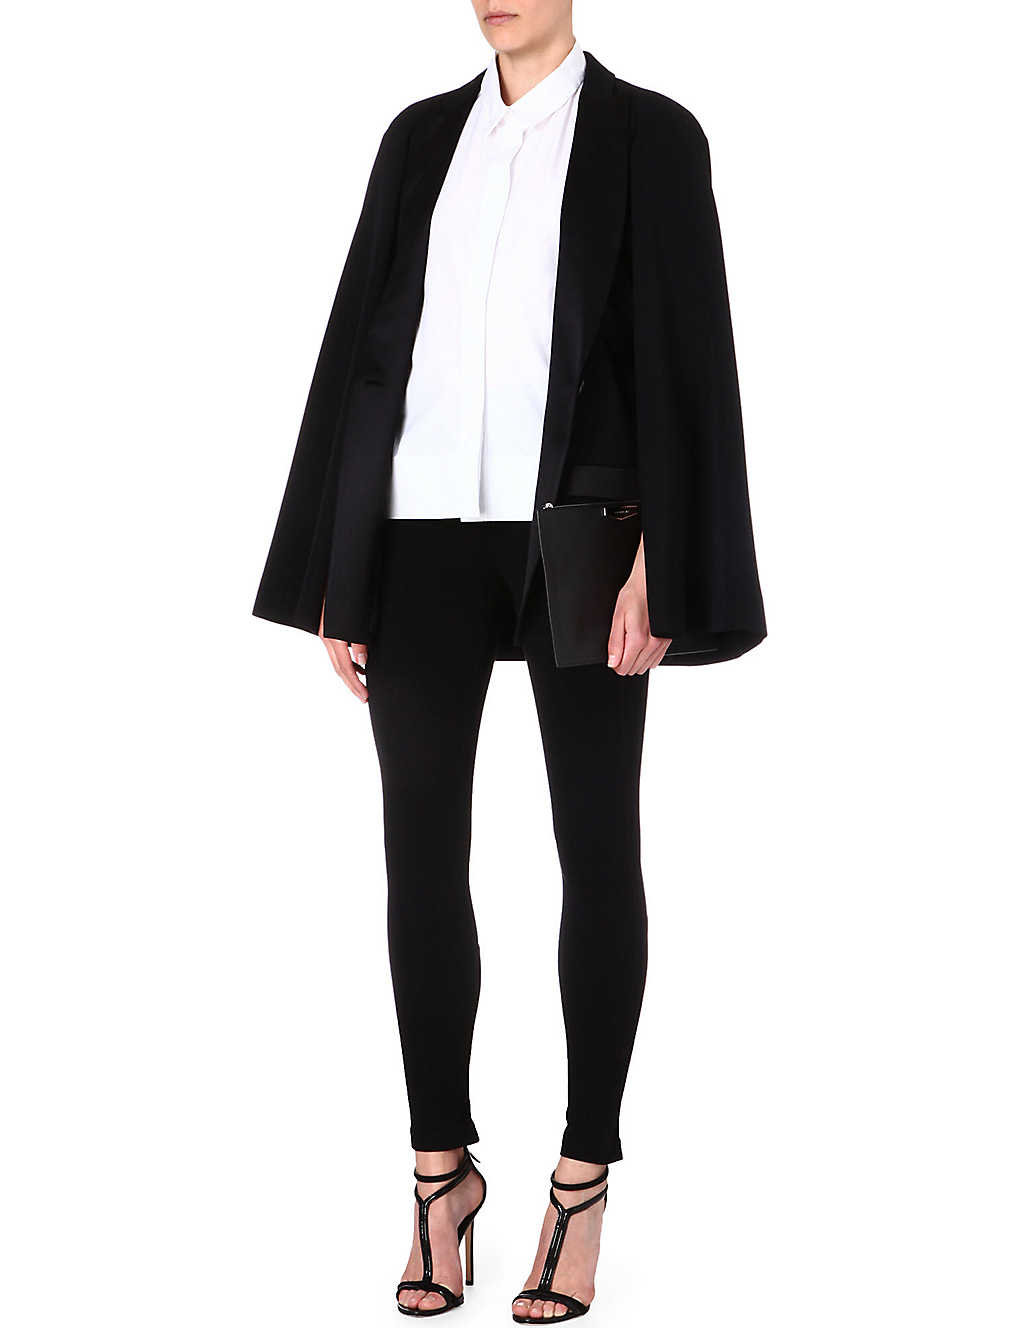 Steal His Style: EJ Johnsons Black Tuxedo Cape and 